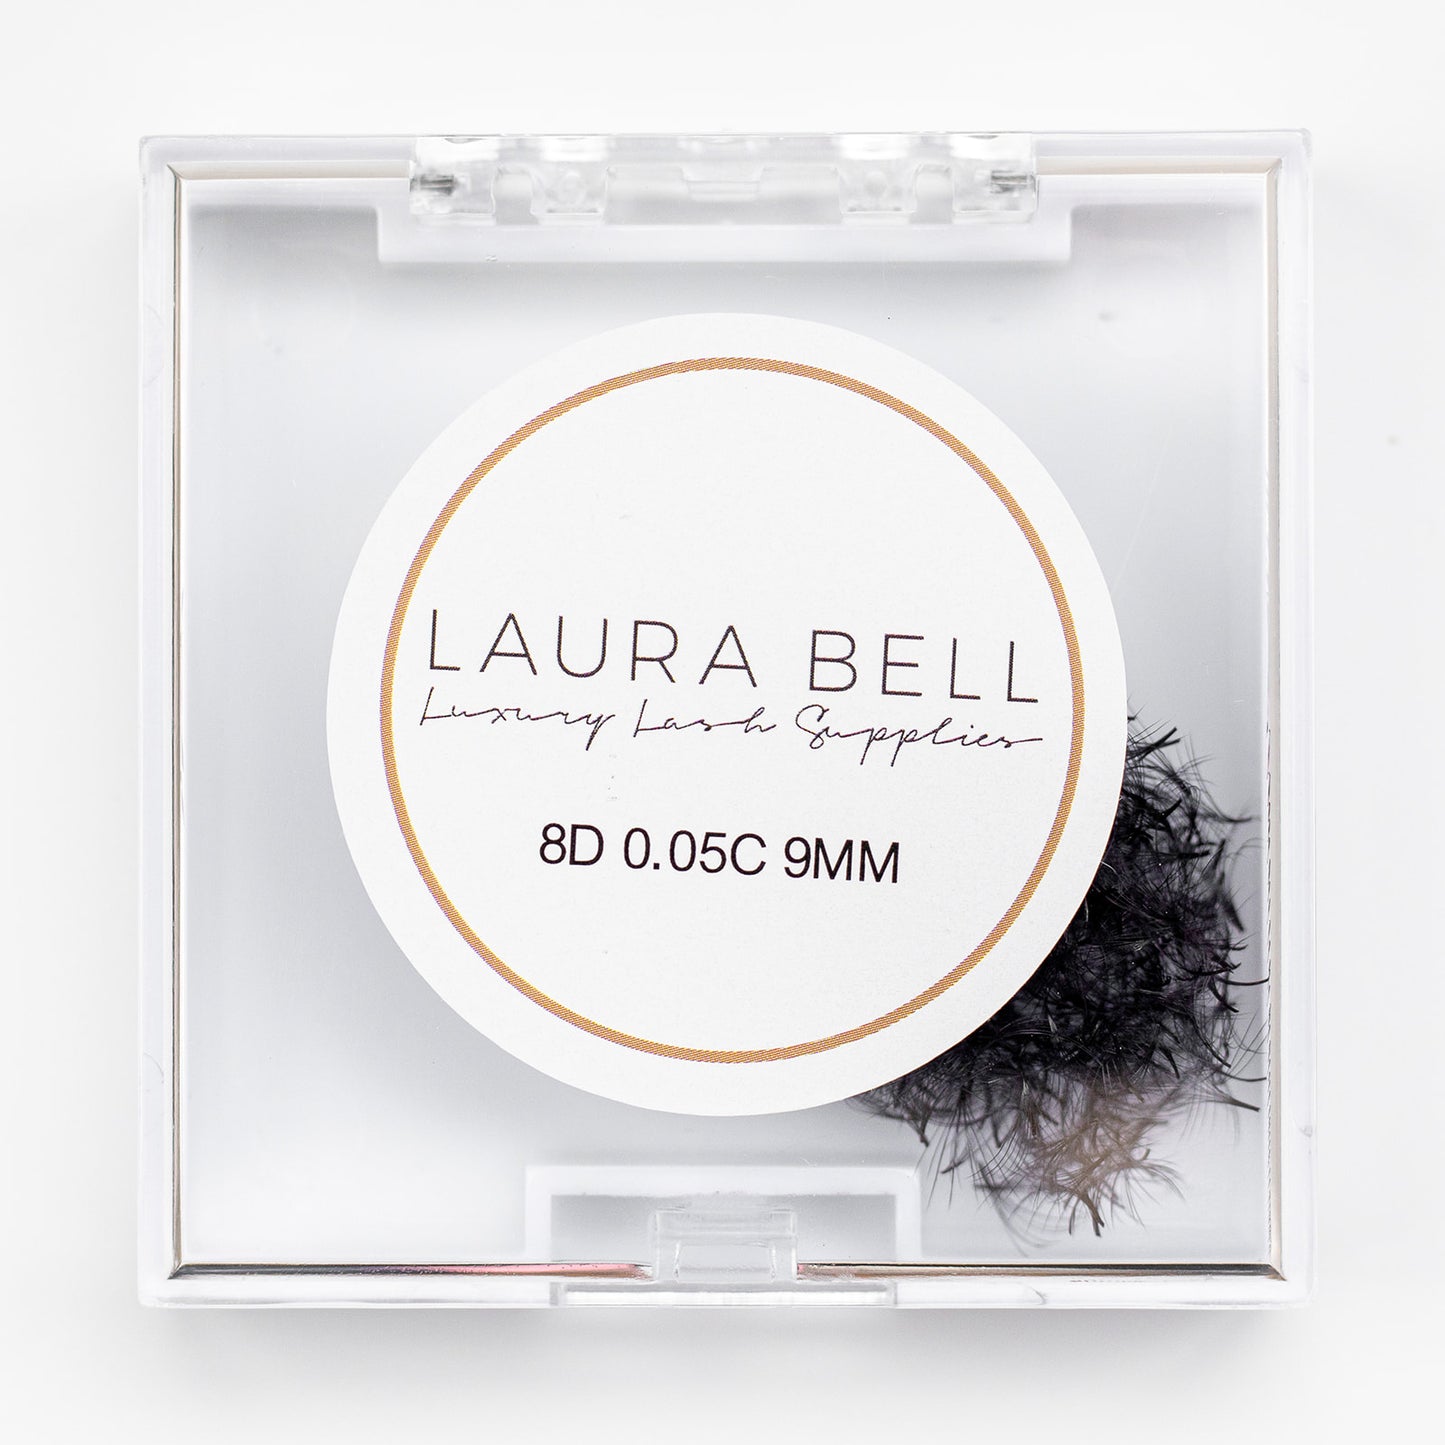 8D 0.05 Loose Premade Fans - Laura Bell Luxury Lash Supplies